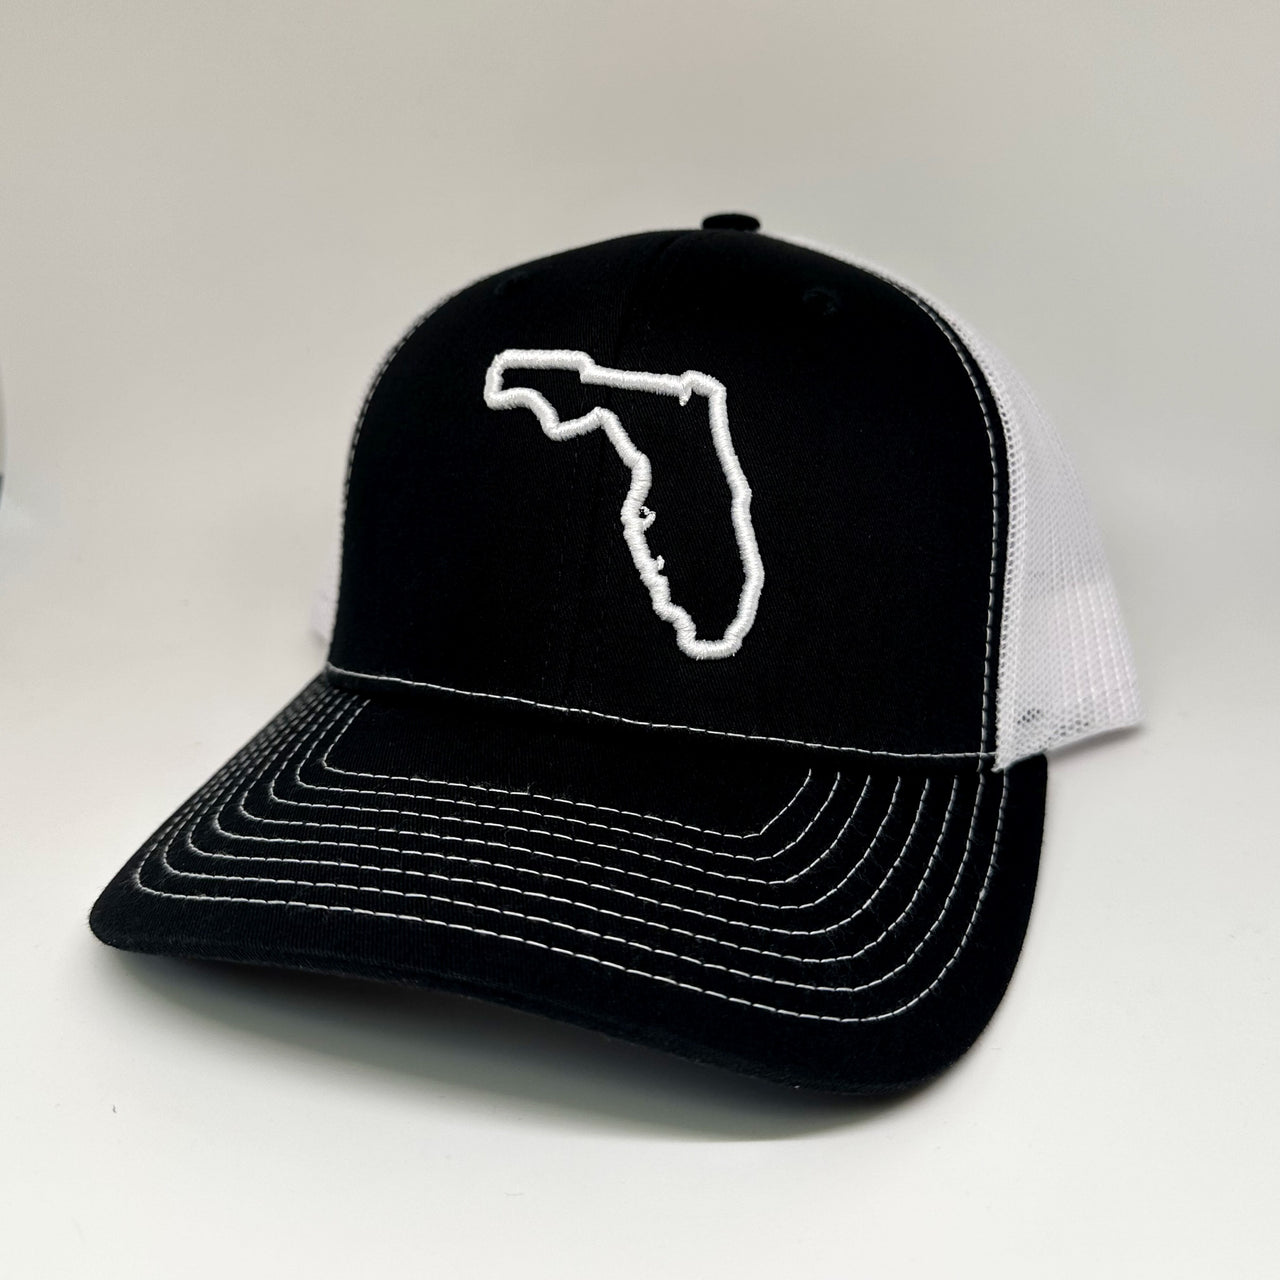 Florida Embroidery Hat - Greater Half